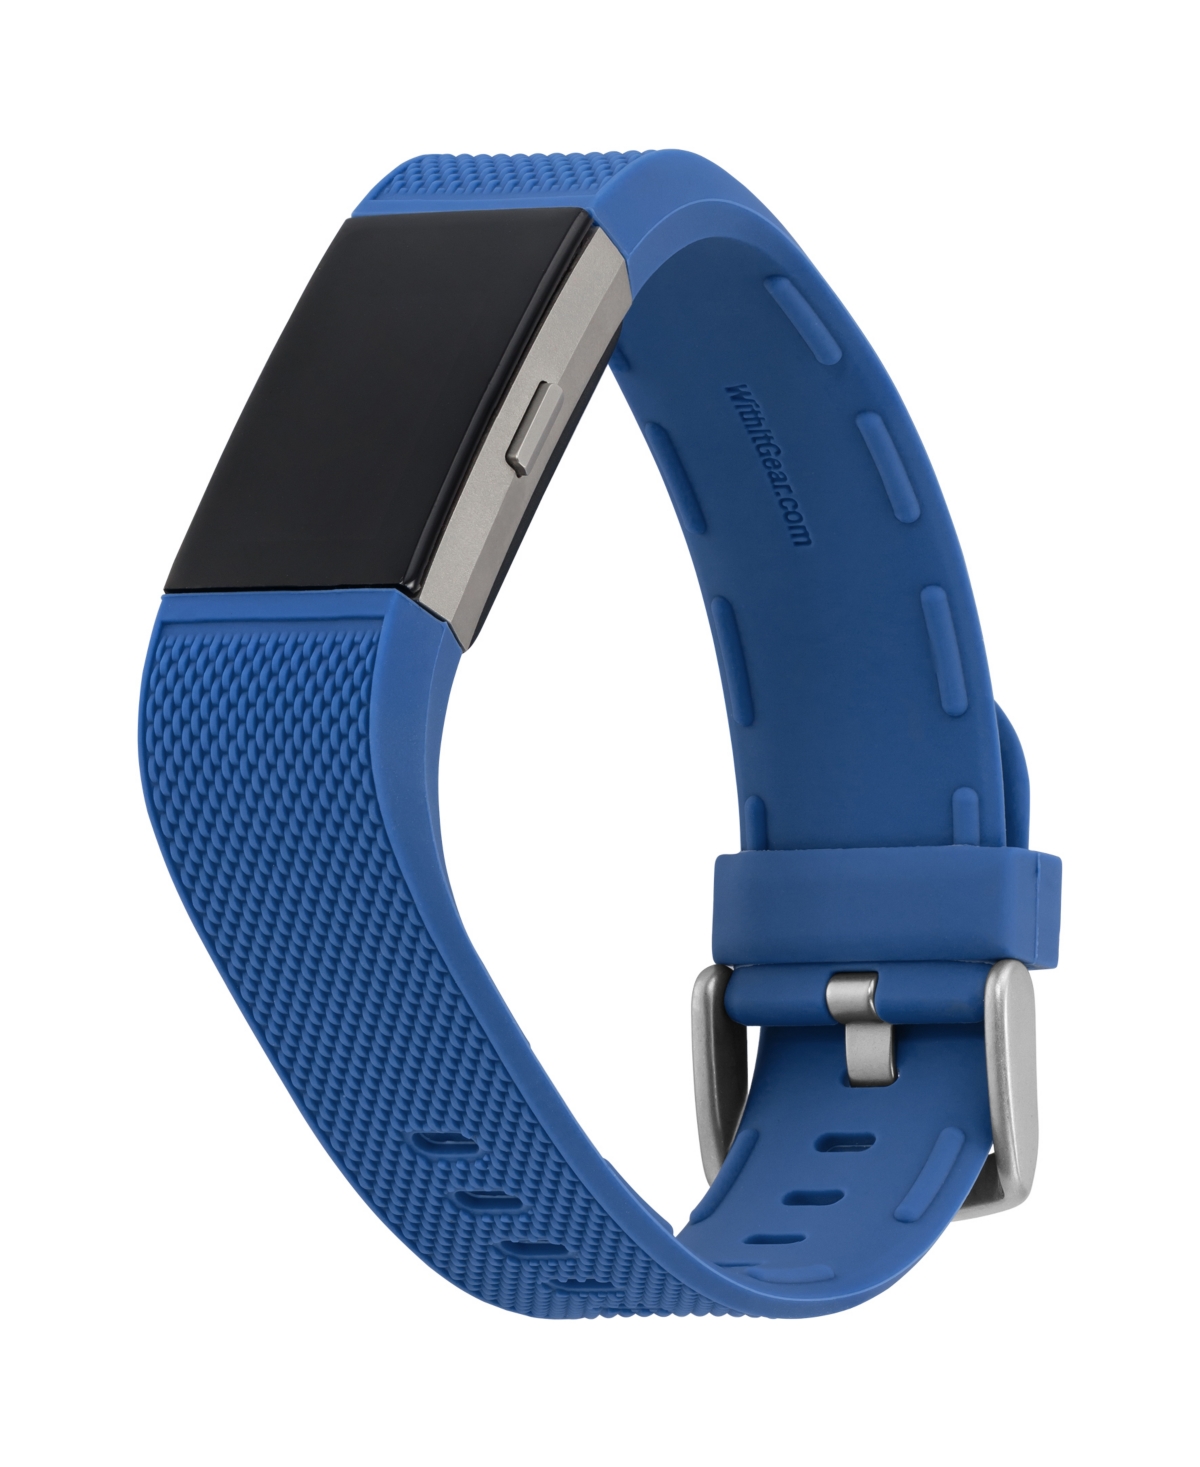 Blue Premium Woven Silicone Band Compatible with the Fitbit Charge 2 - Blue